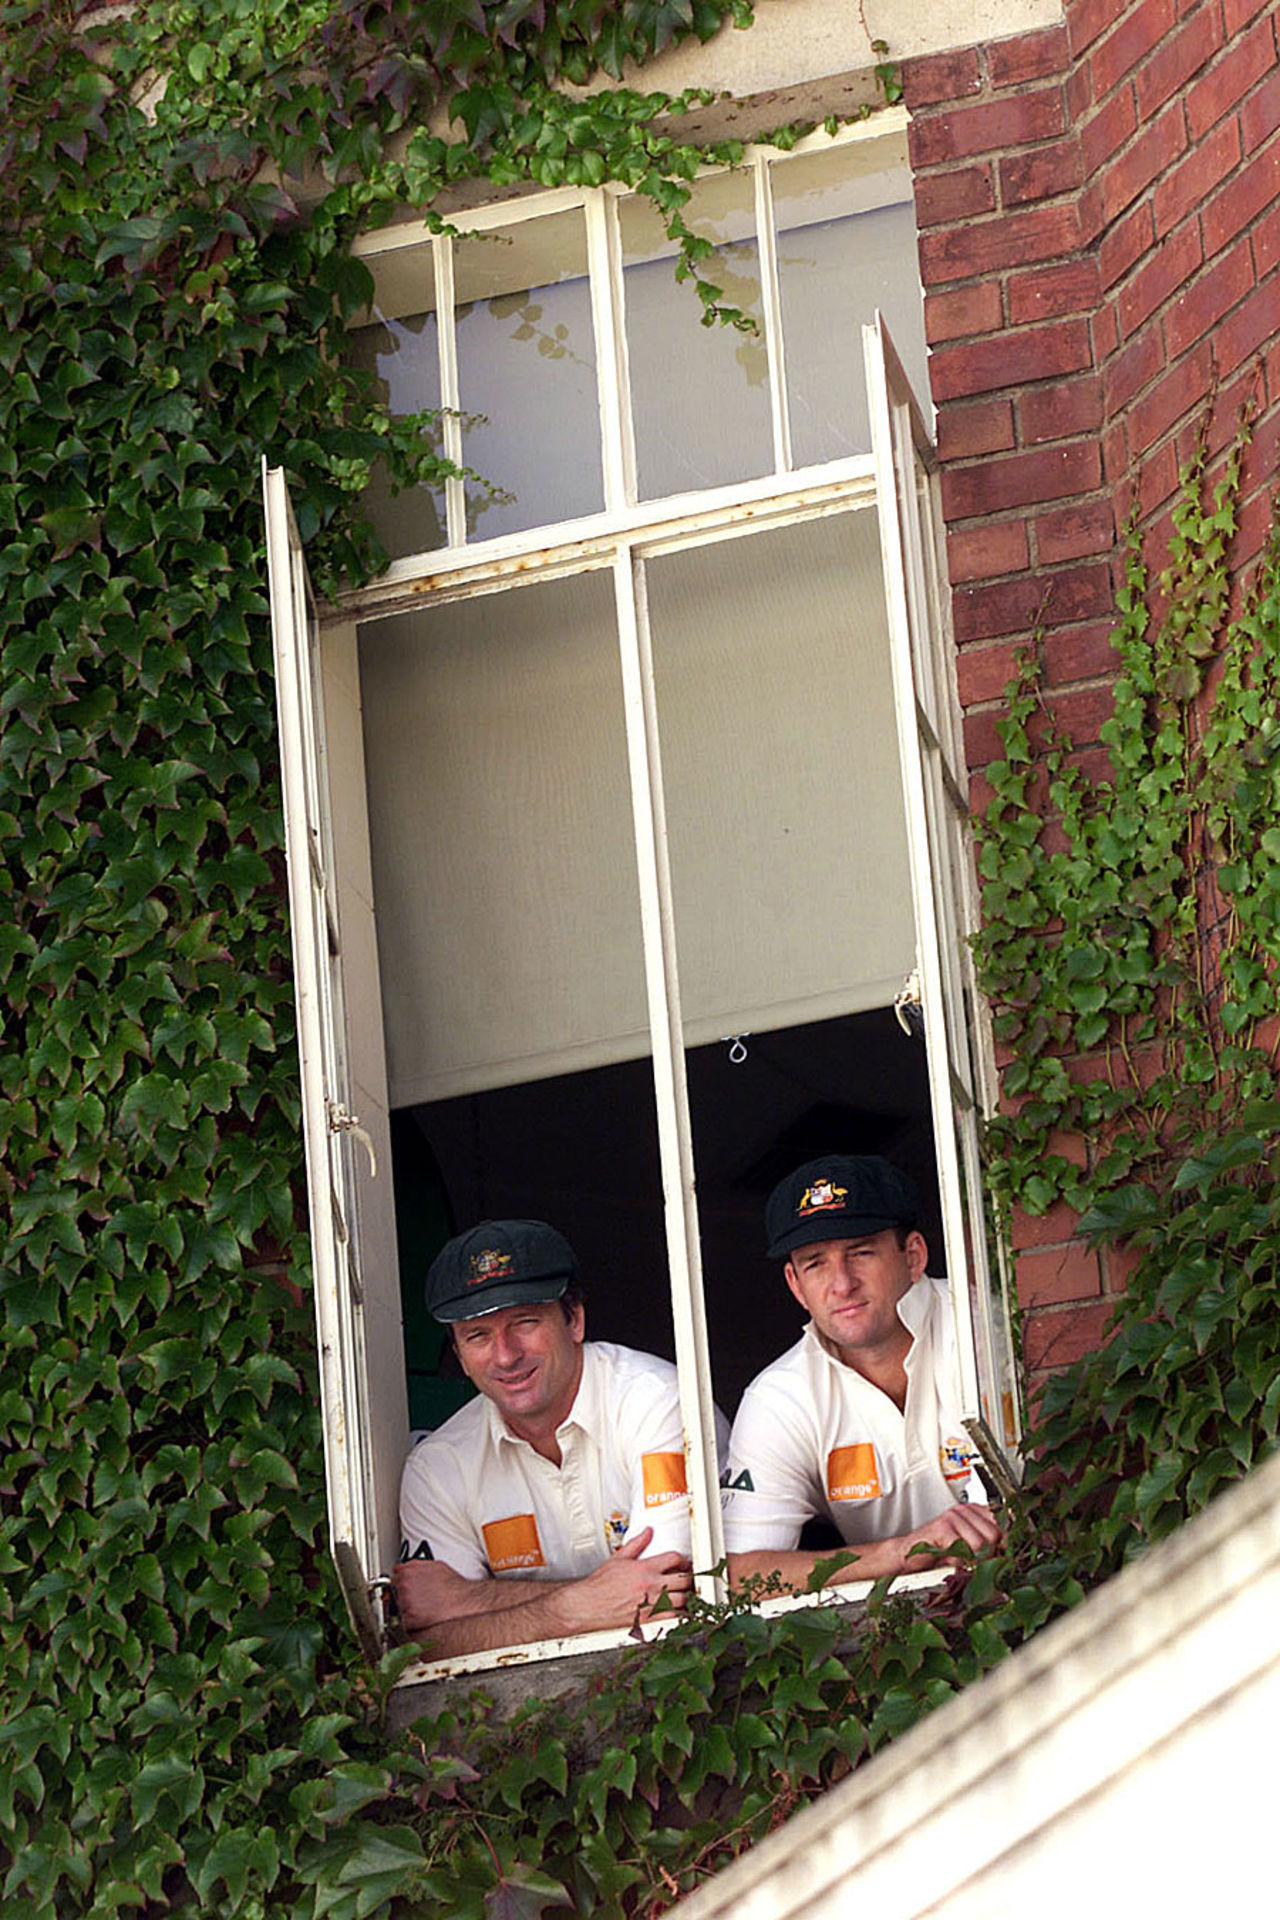 Steve and Mark Waugh take a break on the eve of the 100th Test they played together, Adelaide, December 13, 2001